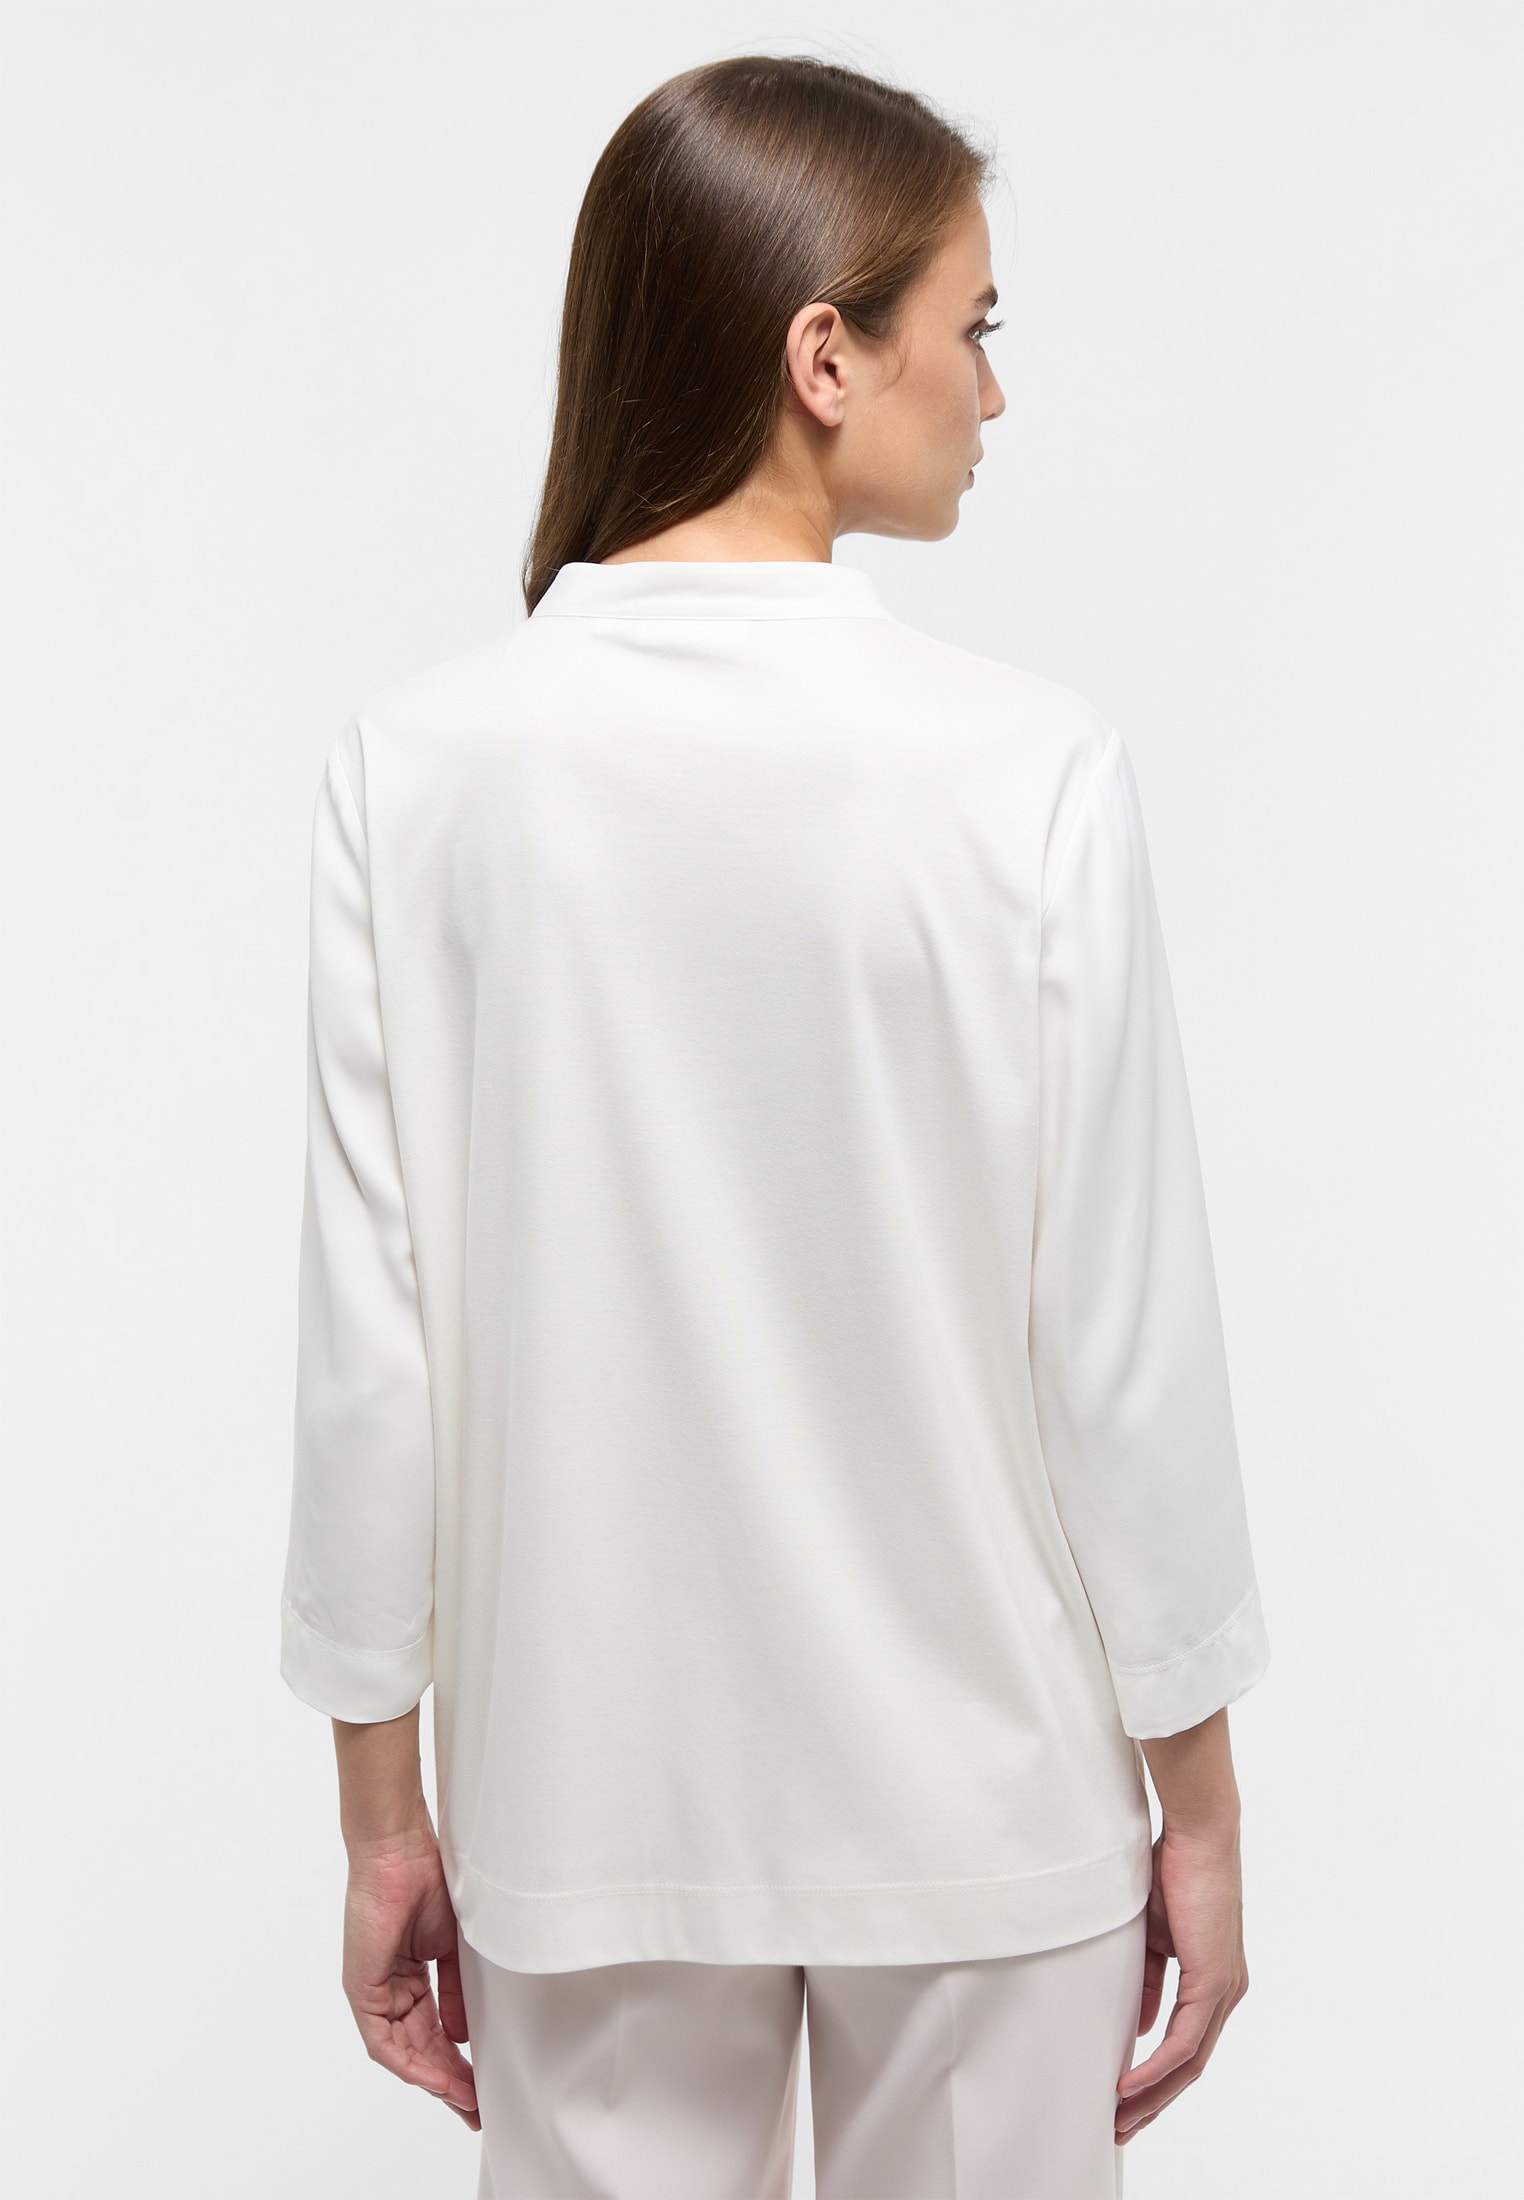 | unifarben off-white Bluse 2BL04358-00-02-46-3/4 Viscose 46 | | off-white 3/4-Arm | Shirt in